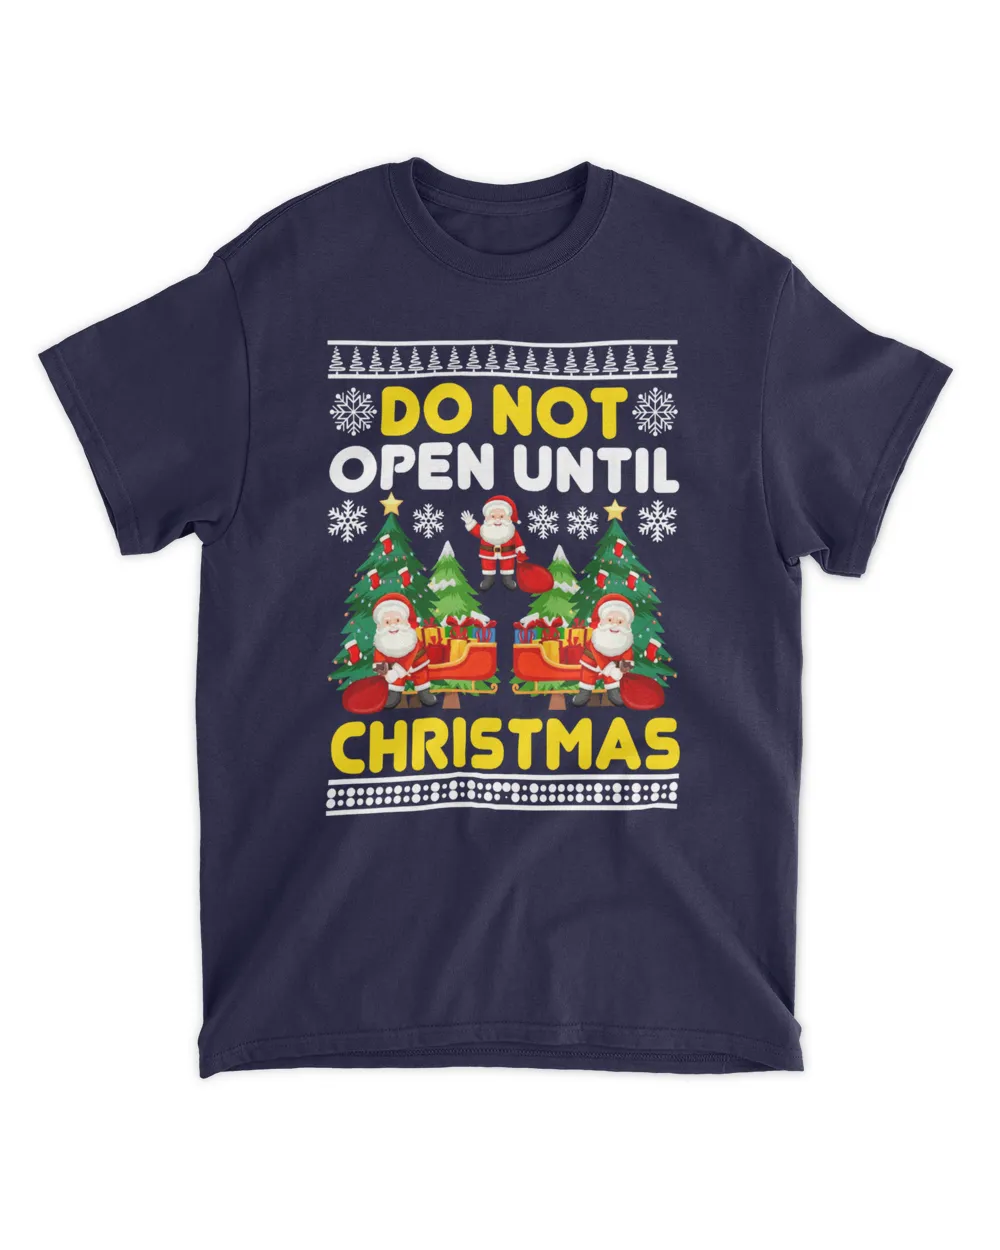 Do not open until christmas-